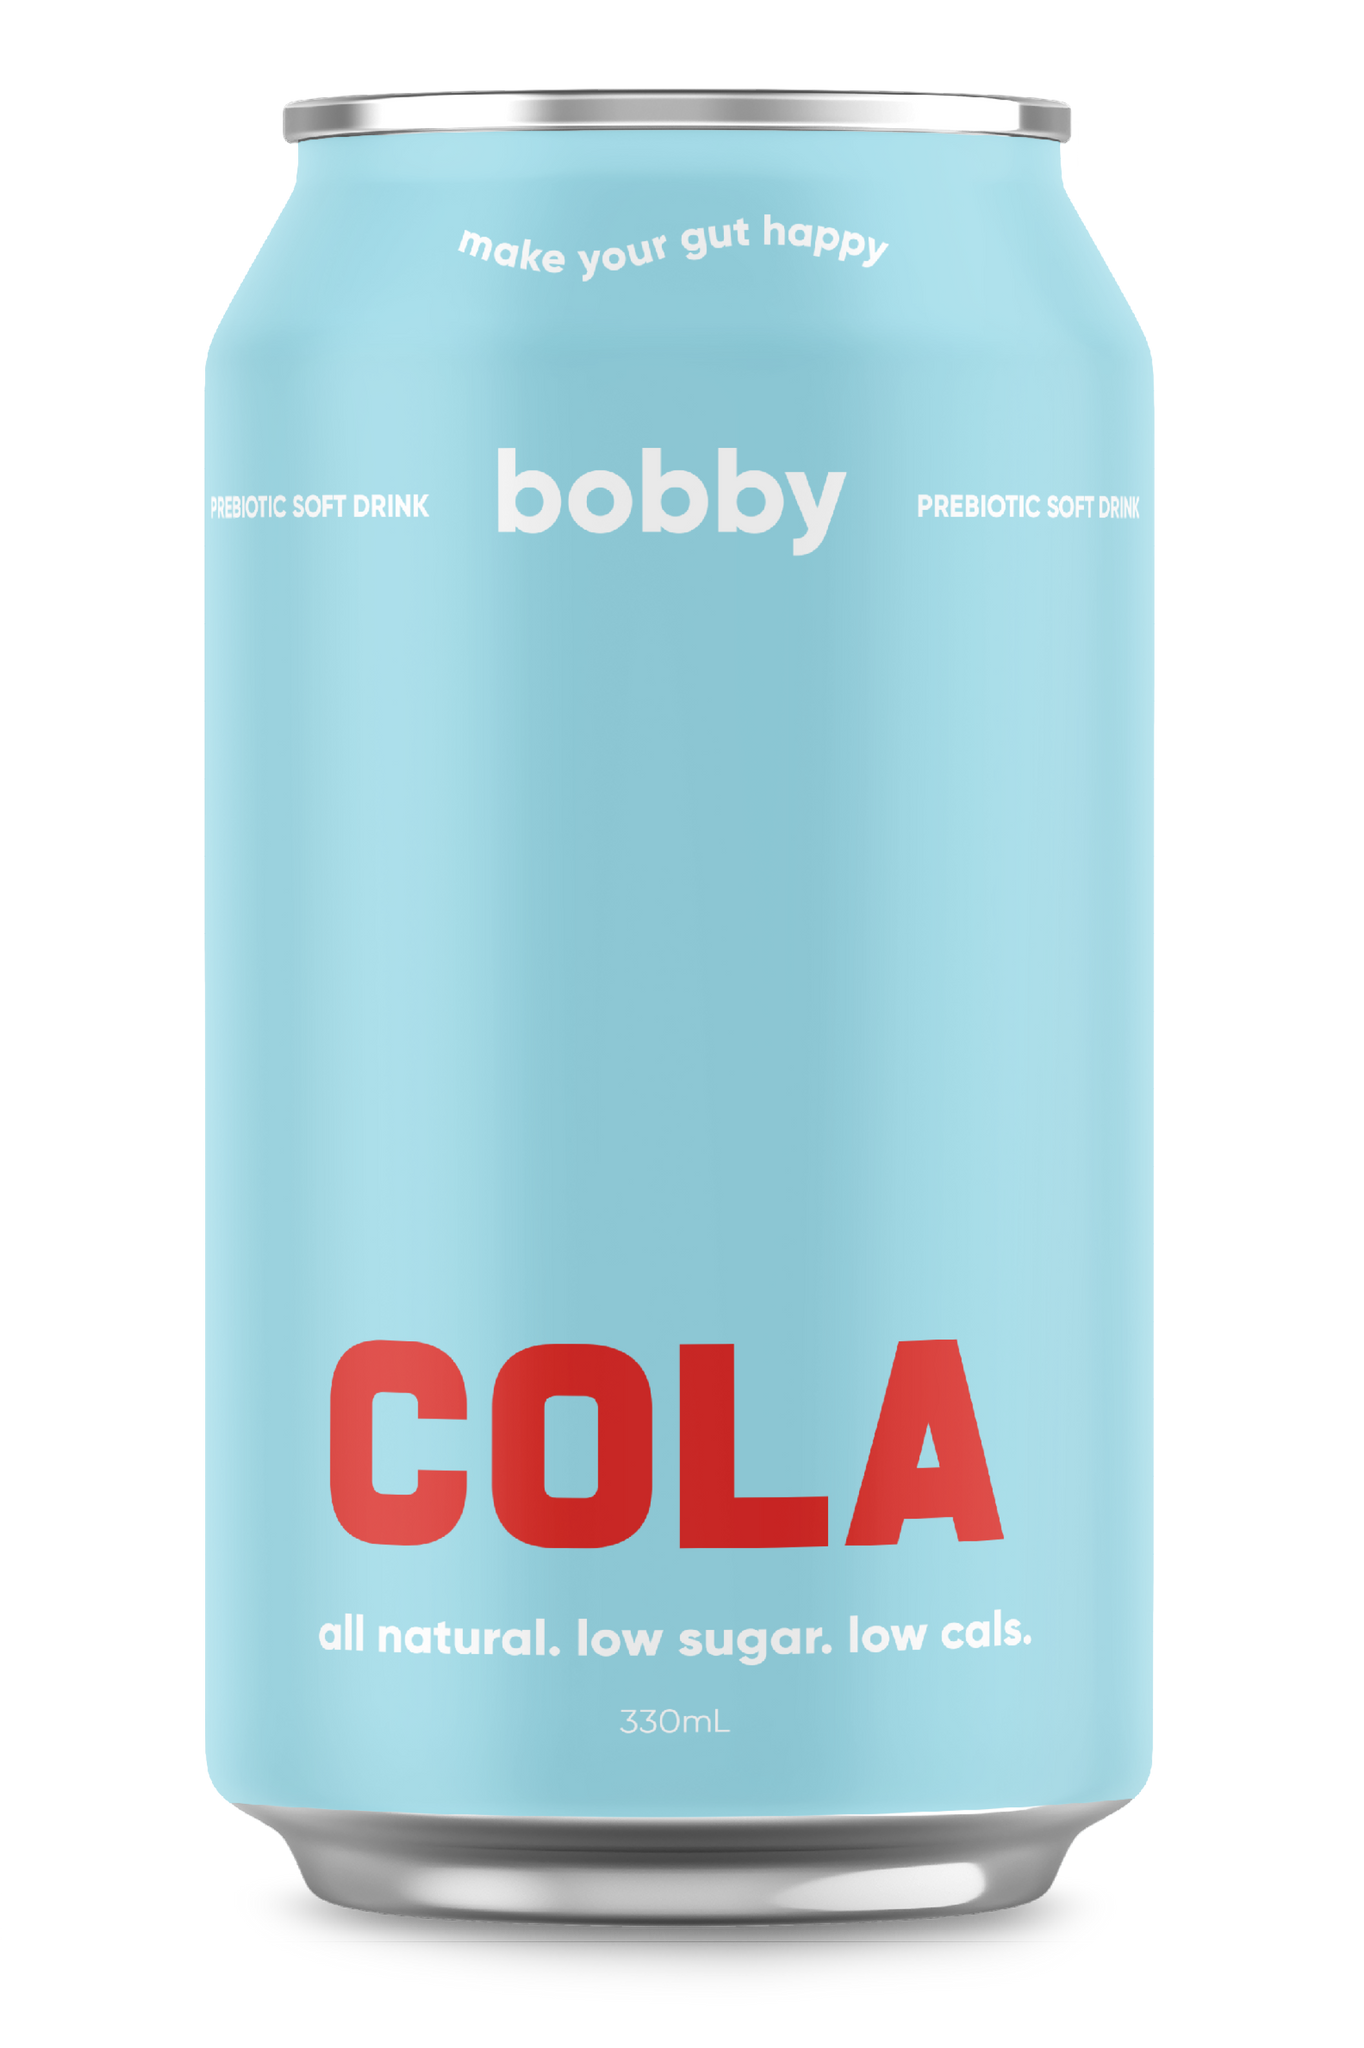 coca cola can, blue soda, all natural, low sugar and low cals that aids in gut health